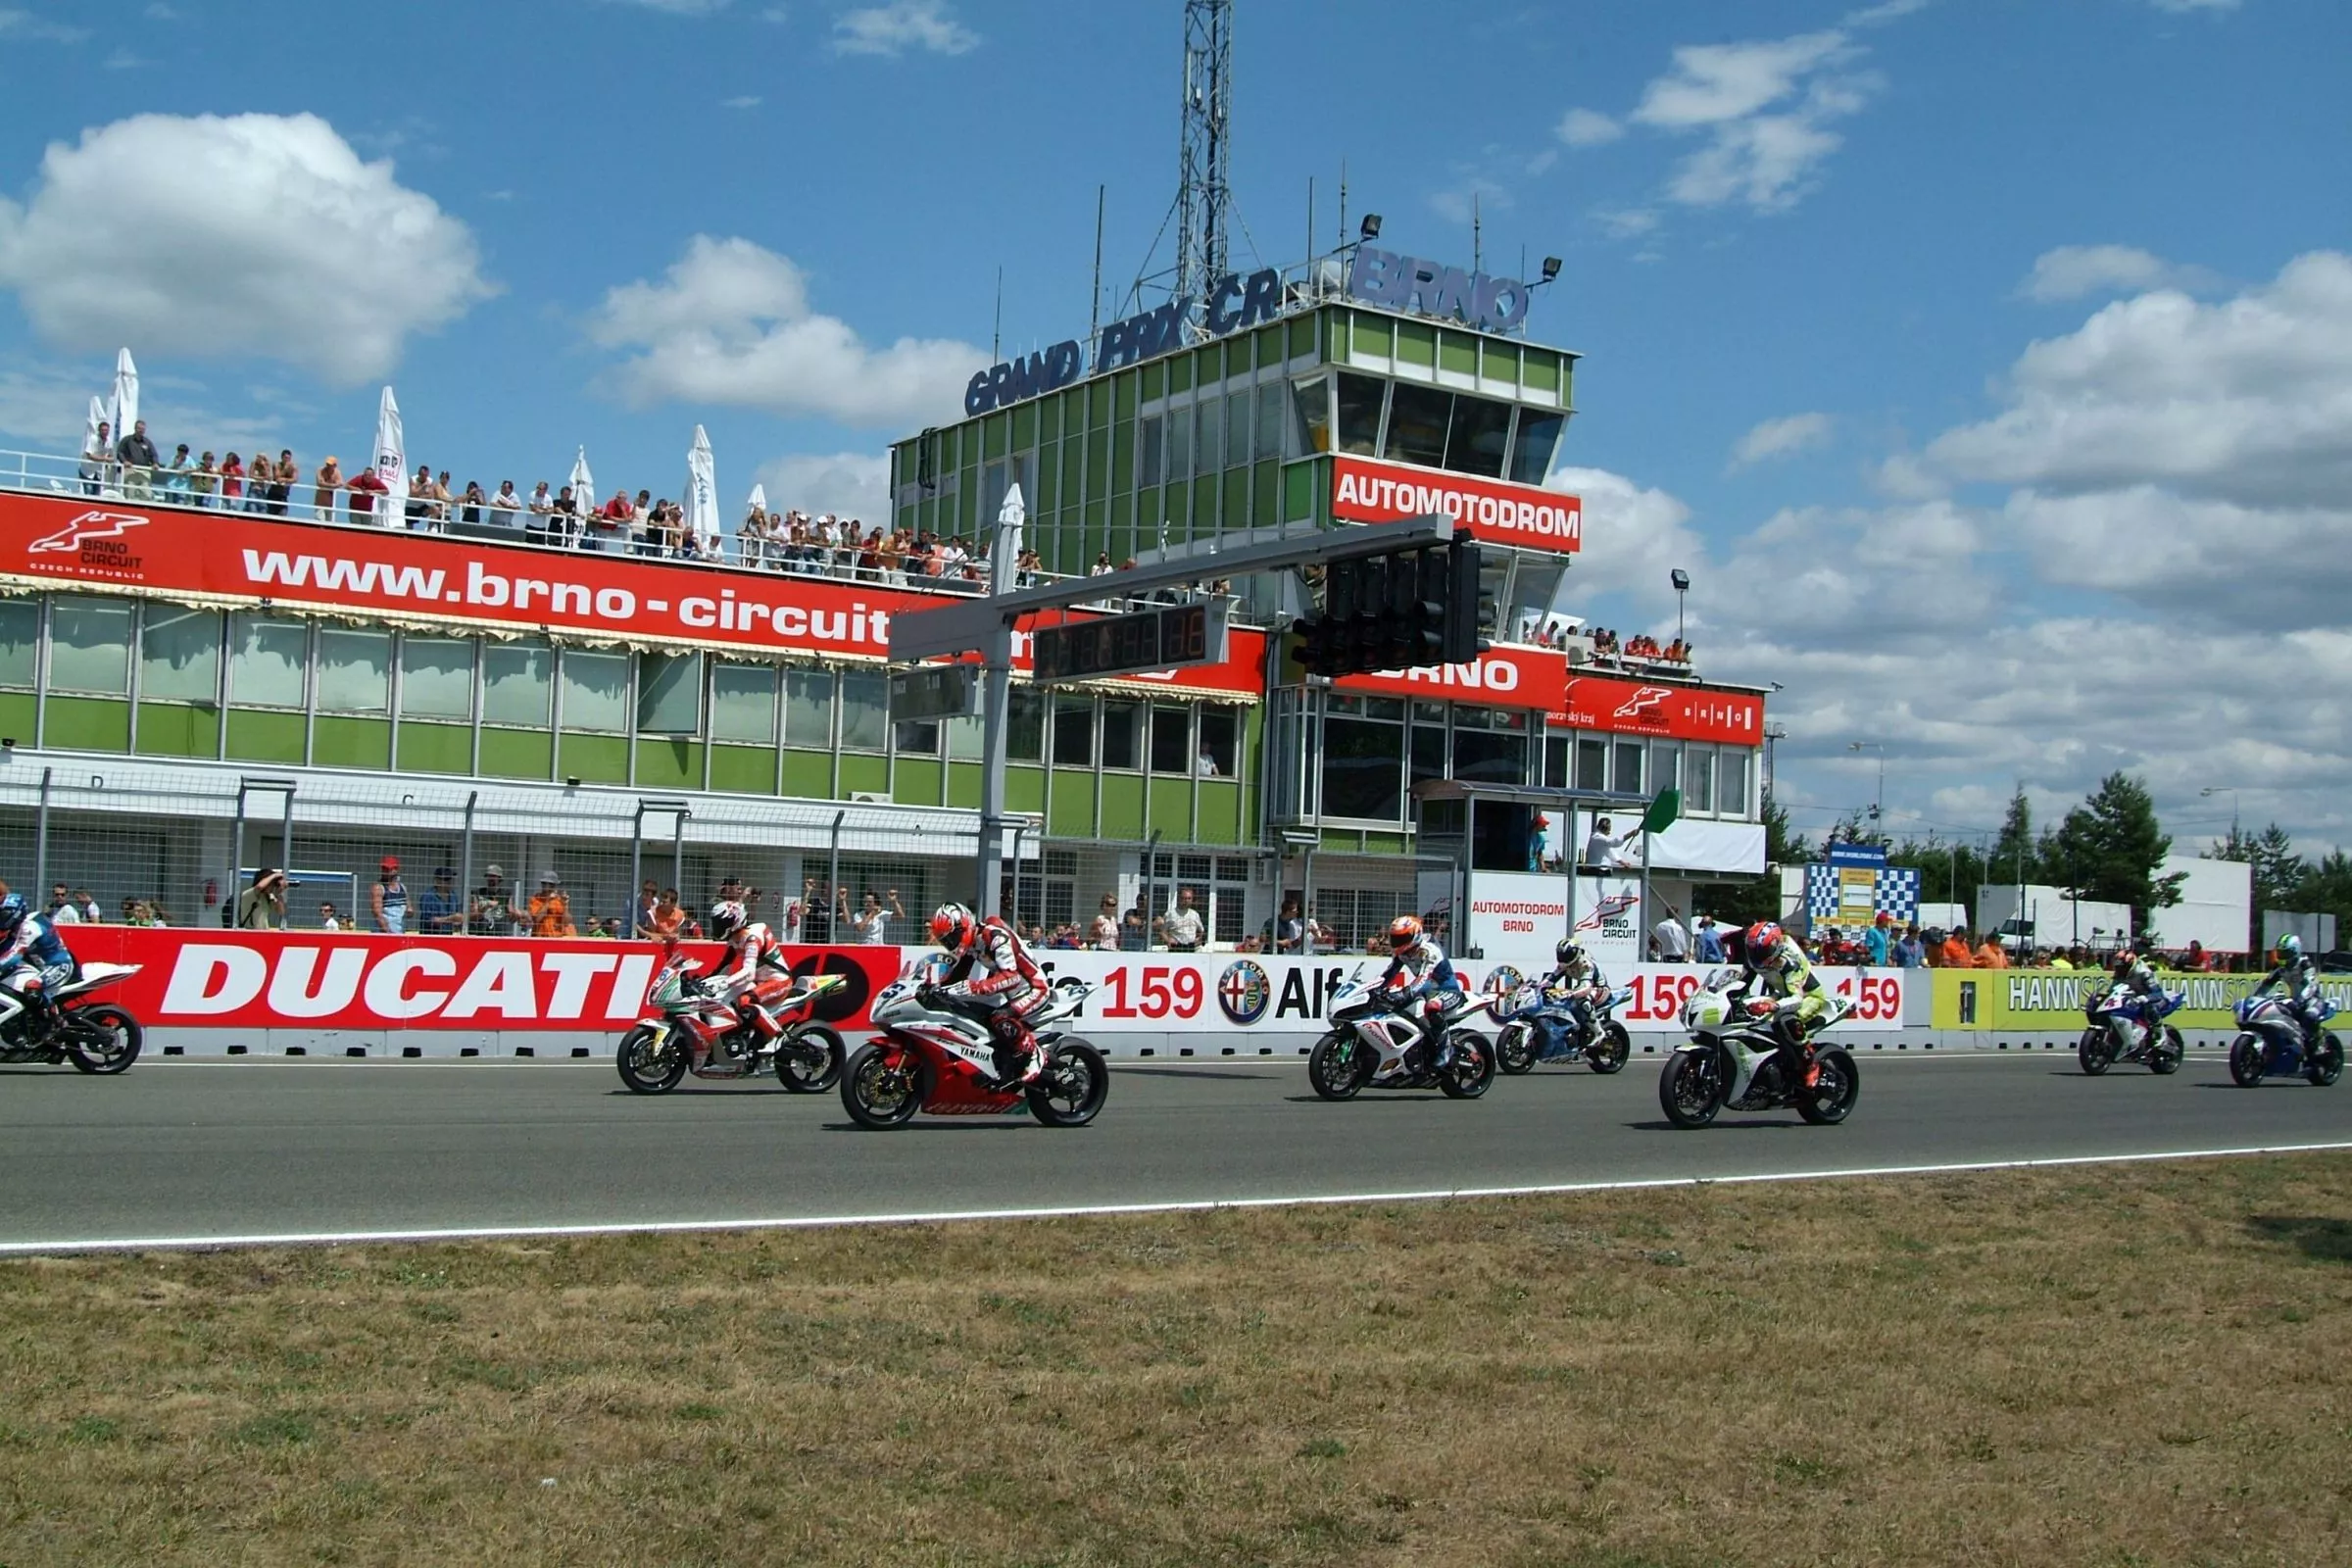 Automotodrom Brno in Czech Republic, Europe | Racing,Motorcycles - Rated 5.7